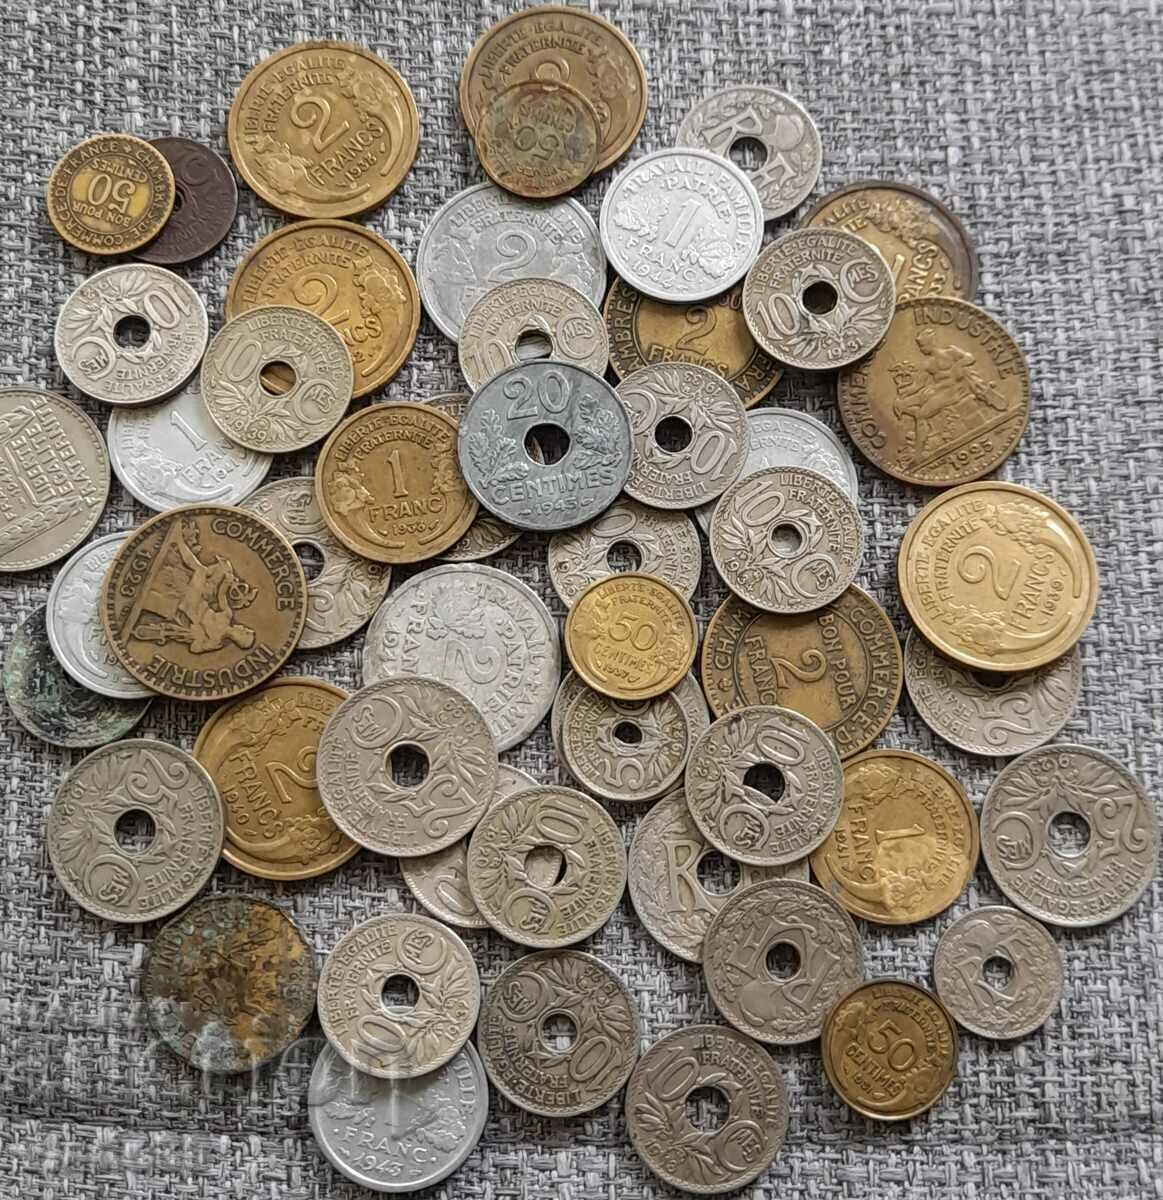 53 old French coins of the 20th, 30th and 40th years of the 20th century.